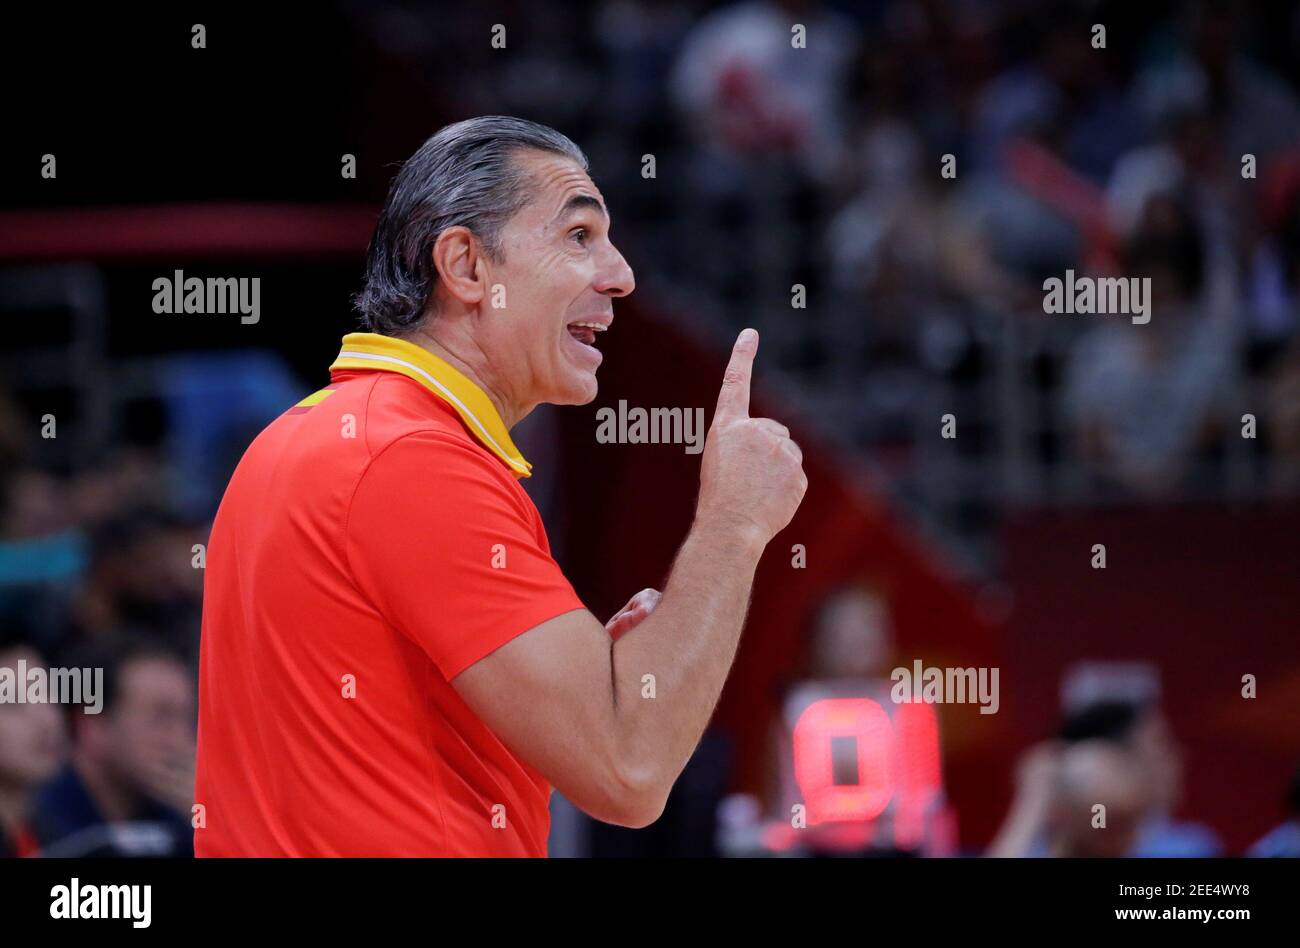 Basketball - FIBA World Cup - Final - Argentina v Spain - Wukesong Sport Arena, Beijing, China - September 15, 2019  Spain coach Sergio Scariolo gestures  REUTERS/Jason Lee Stock Photo